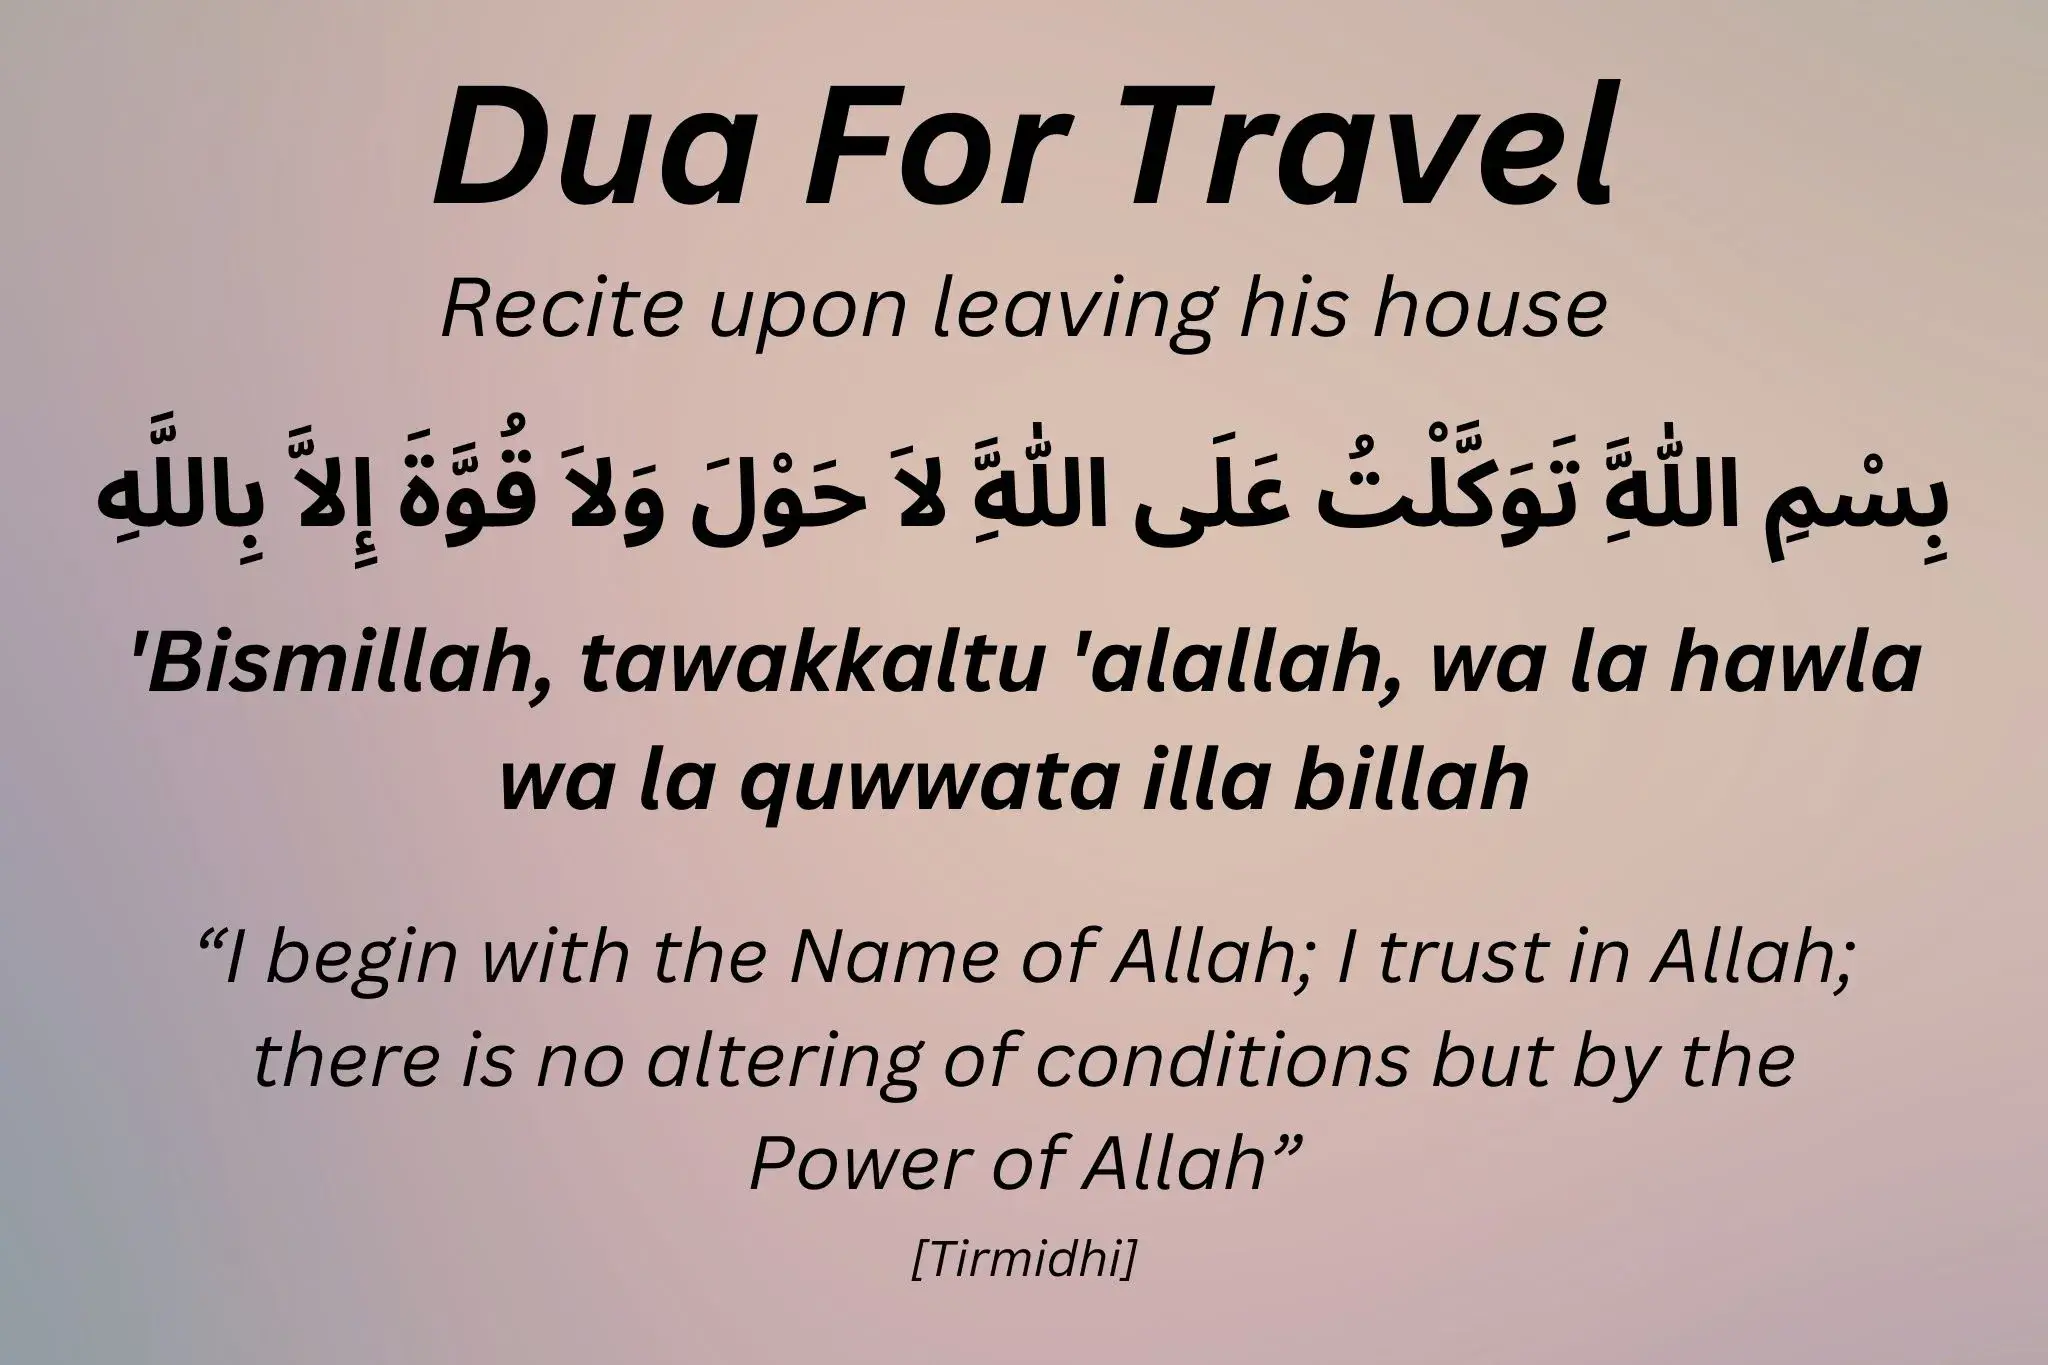 dua for travel recite upon leaving his house